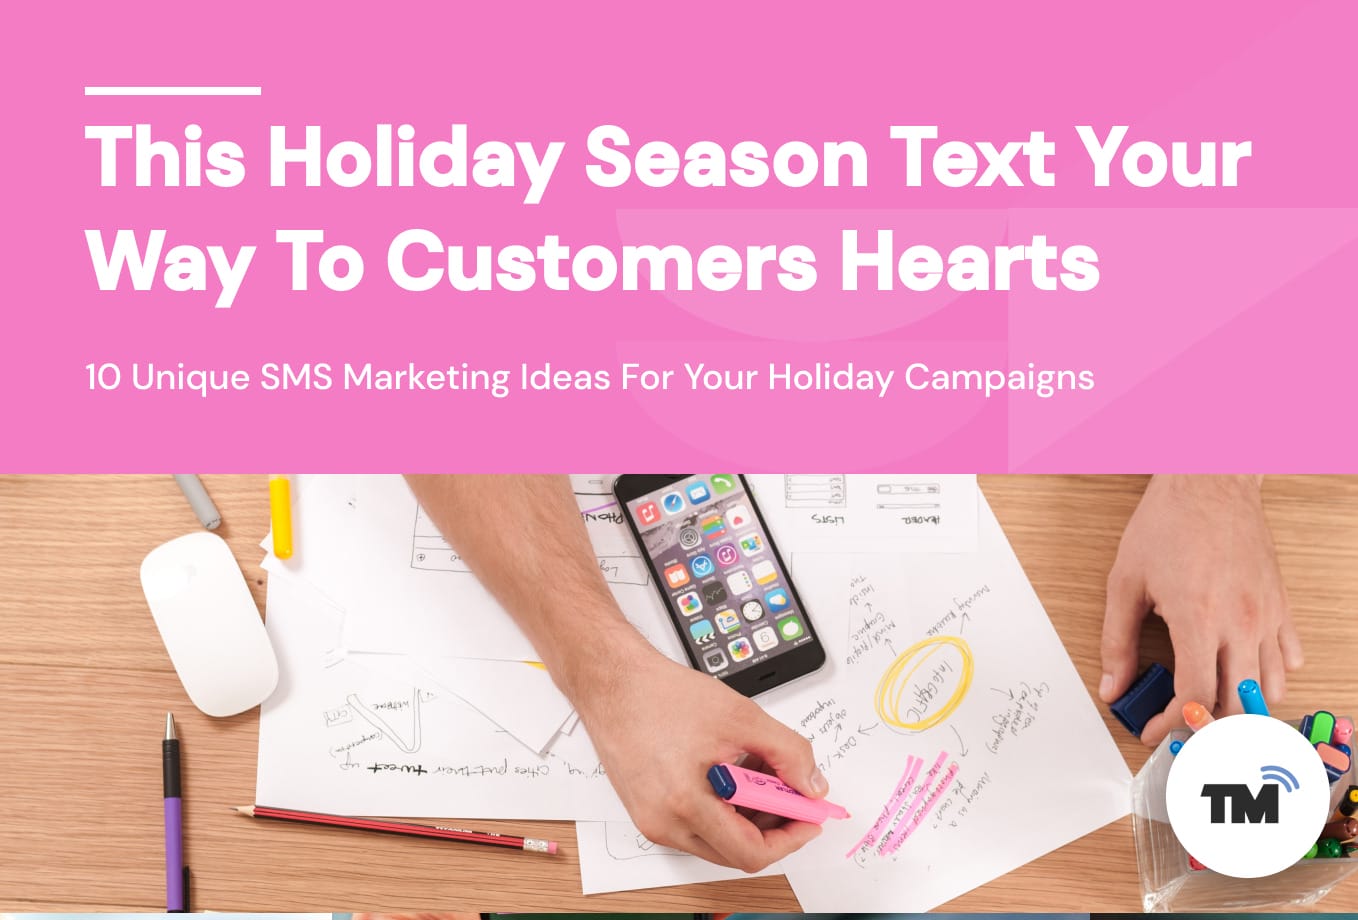 10 Unique SMS Marketing Ideas For Your Holiday Campaigns